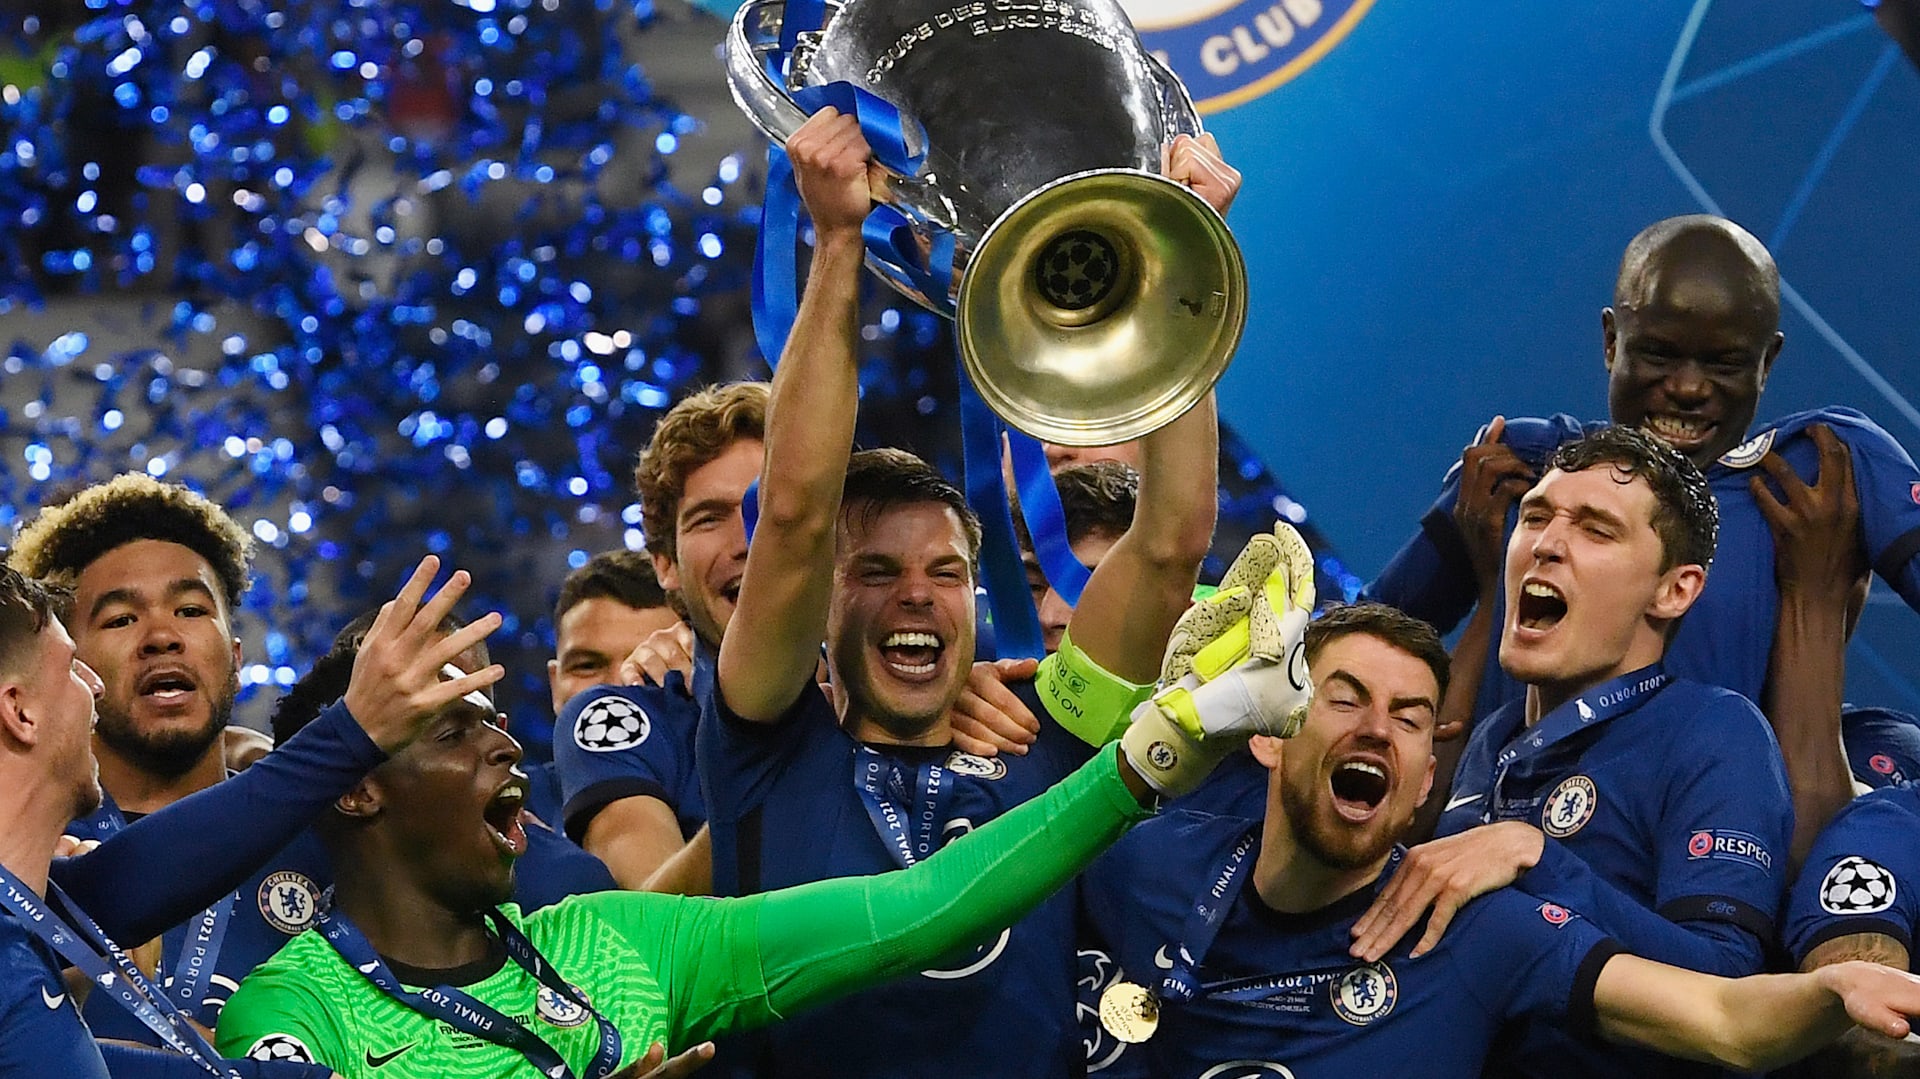 UEFA Champions League Final 2021: How to Watch Chelsea vs